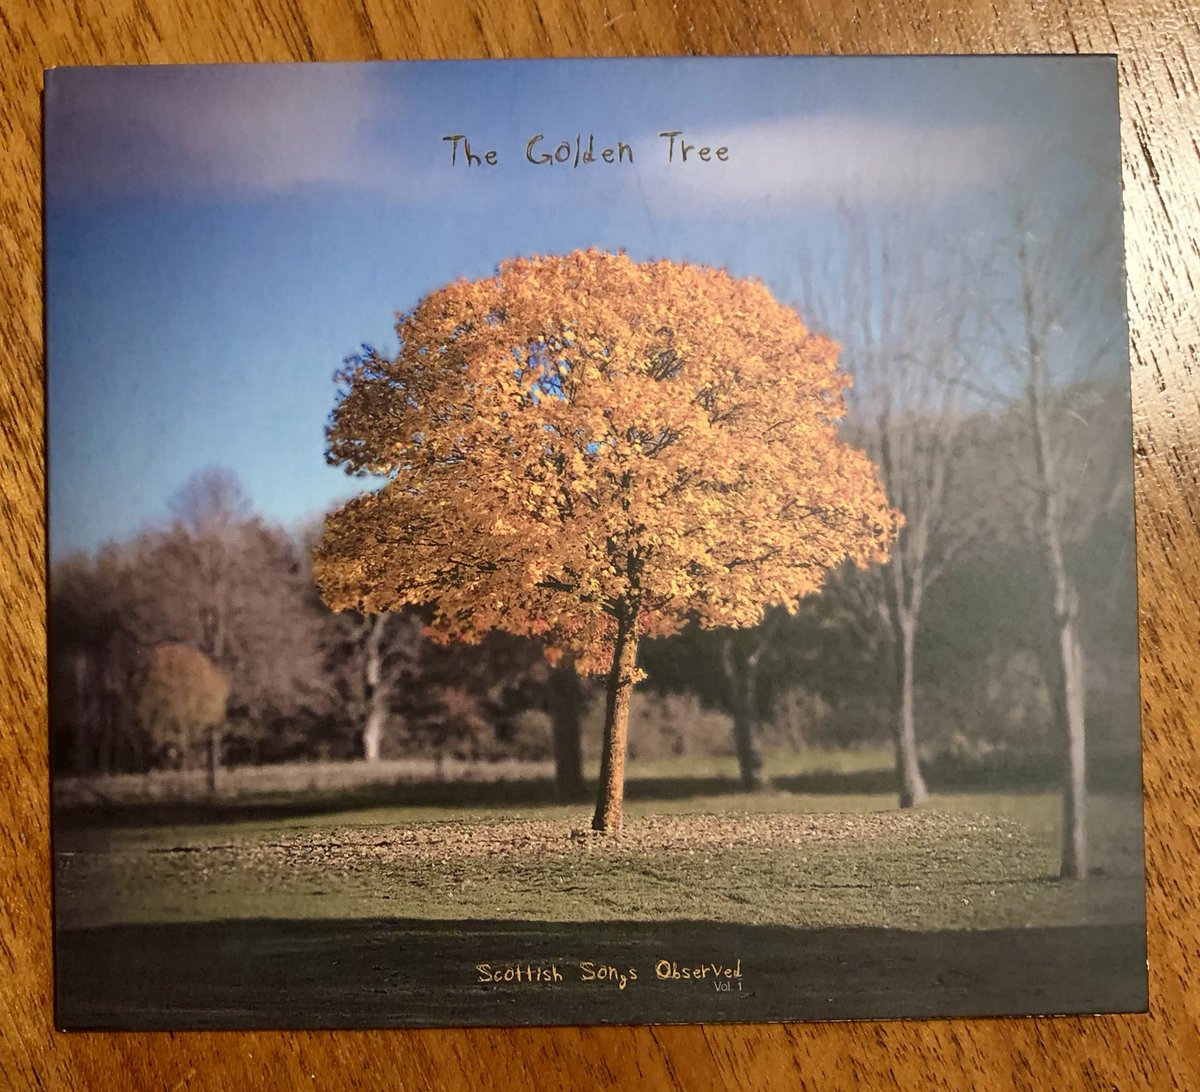 This little bit of magic arrived today. It’s exquisite, pure and truthful treasures from the Scottish songbook. Bravo @ropoem @GramSkin and @LNFGlasgow 🖤 #thegoldentree